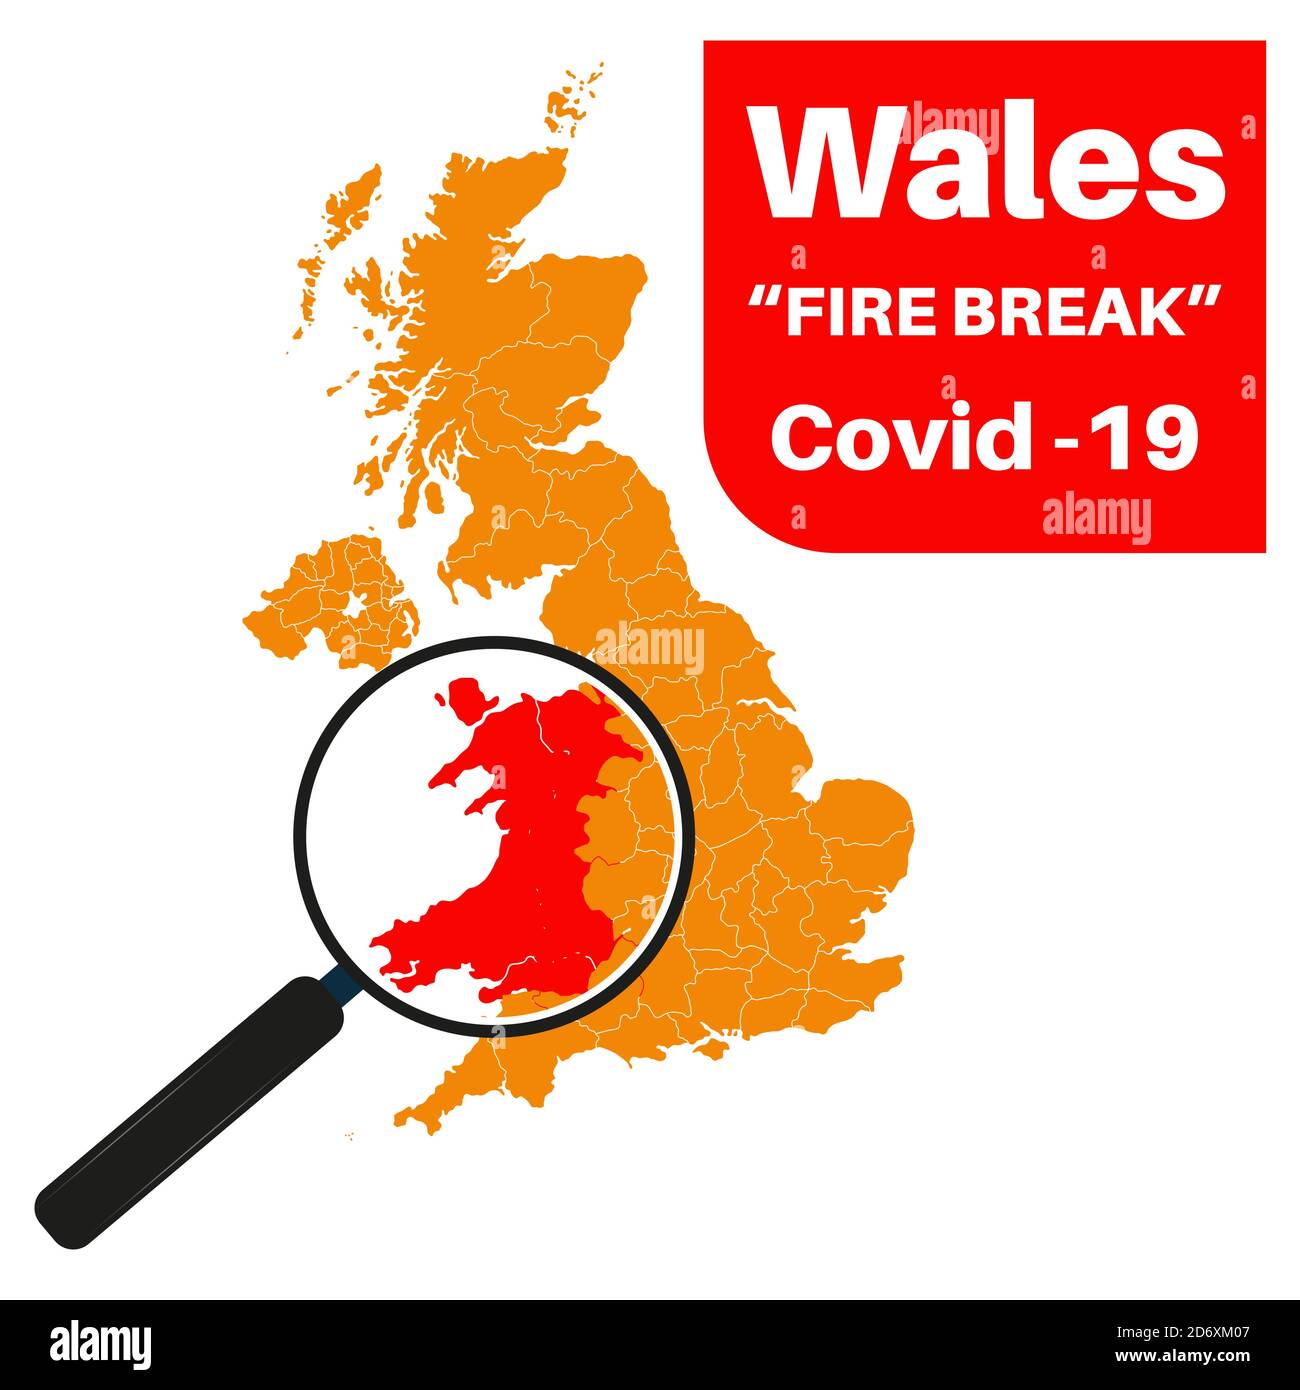 Wales Covid-19 Fire Break with map and magnifying glass Stock Vector